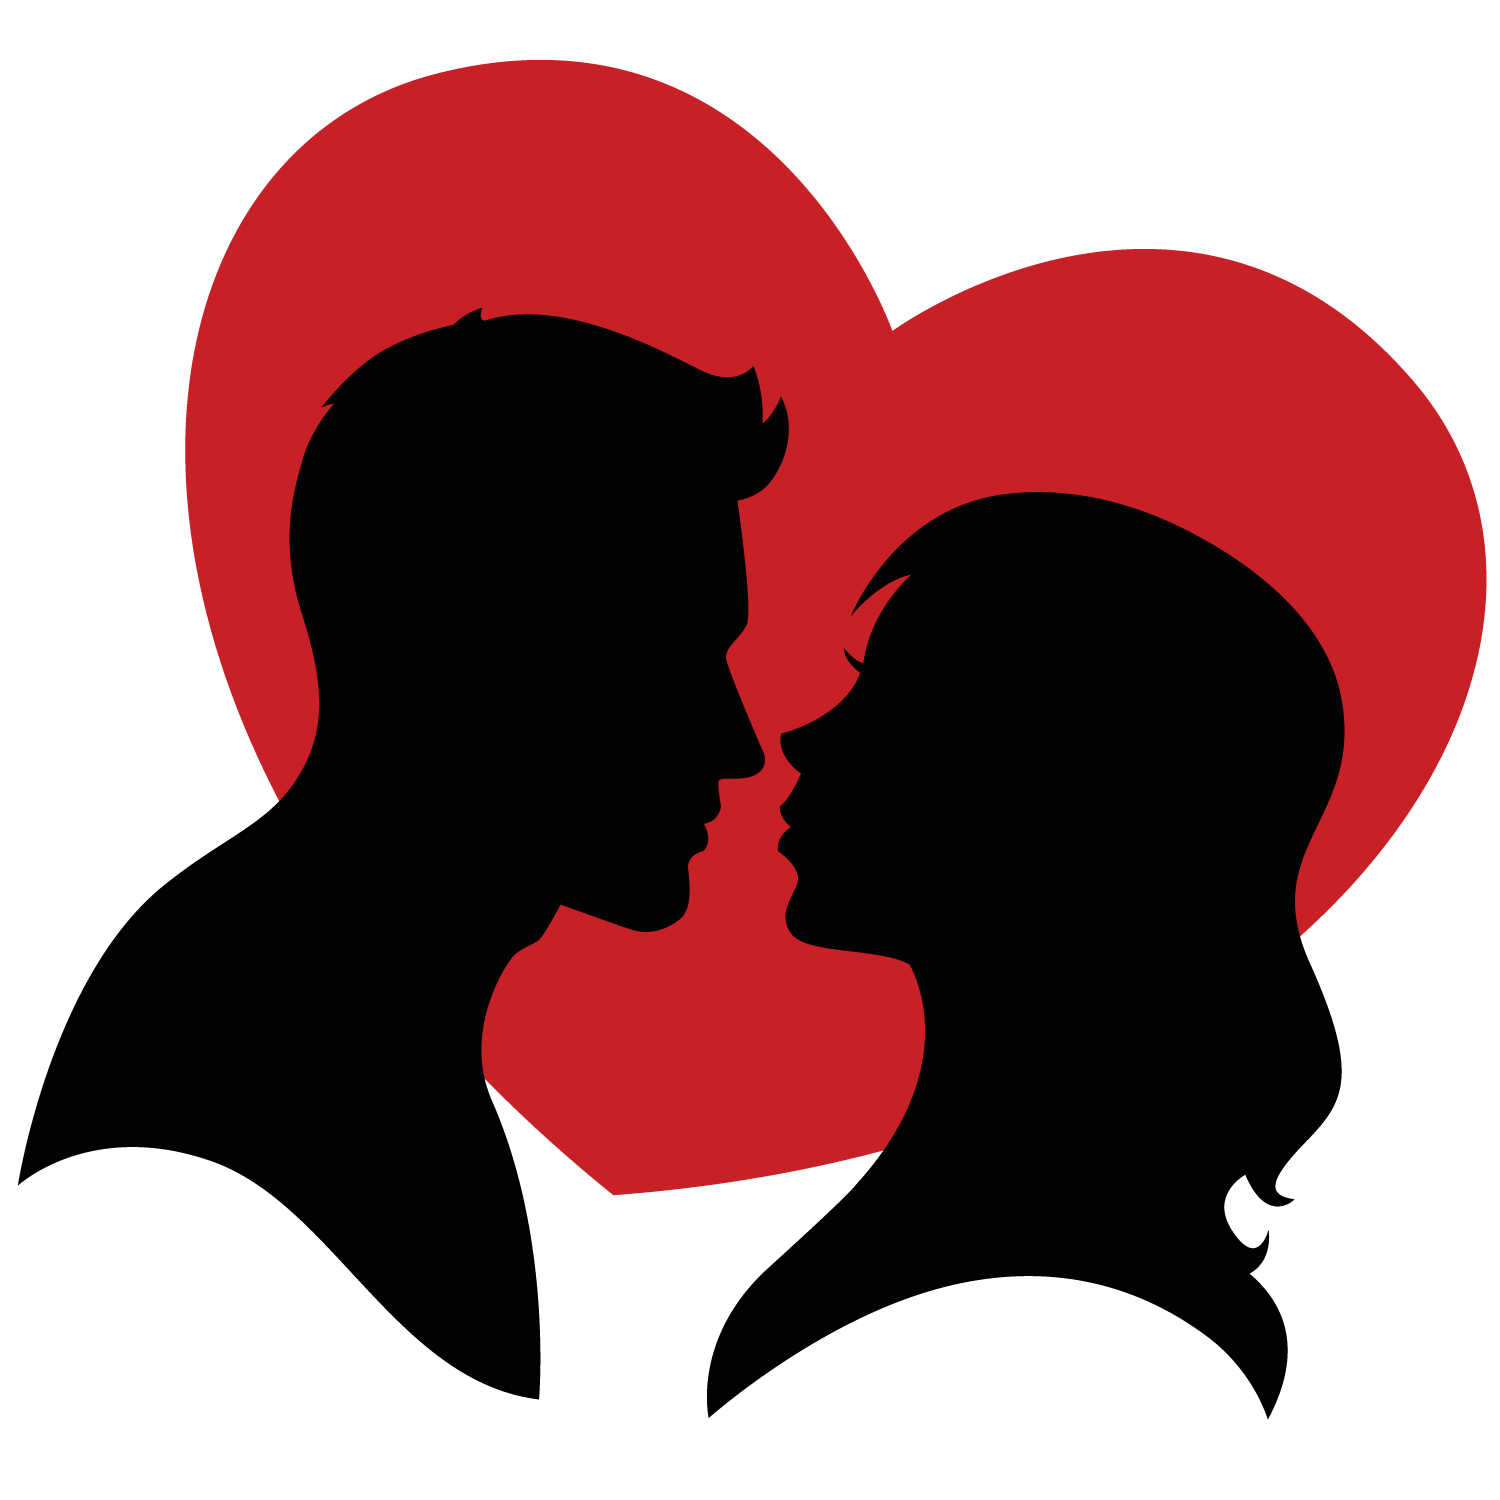 Love Heart Clip Art Couple Silhouette And Hearts Vector Png Download 1500 1500 Free